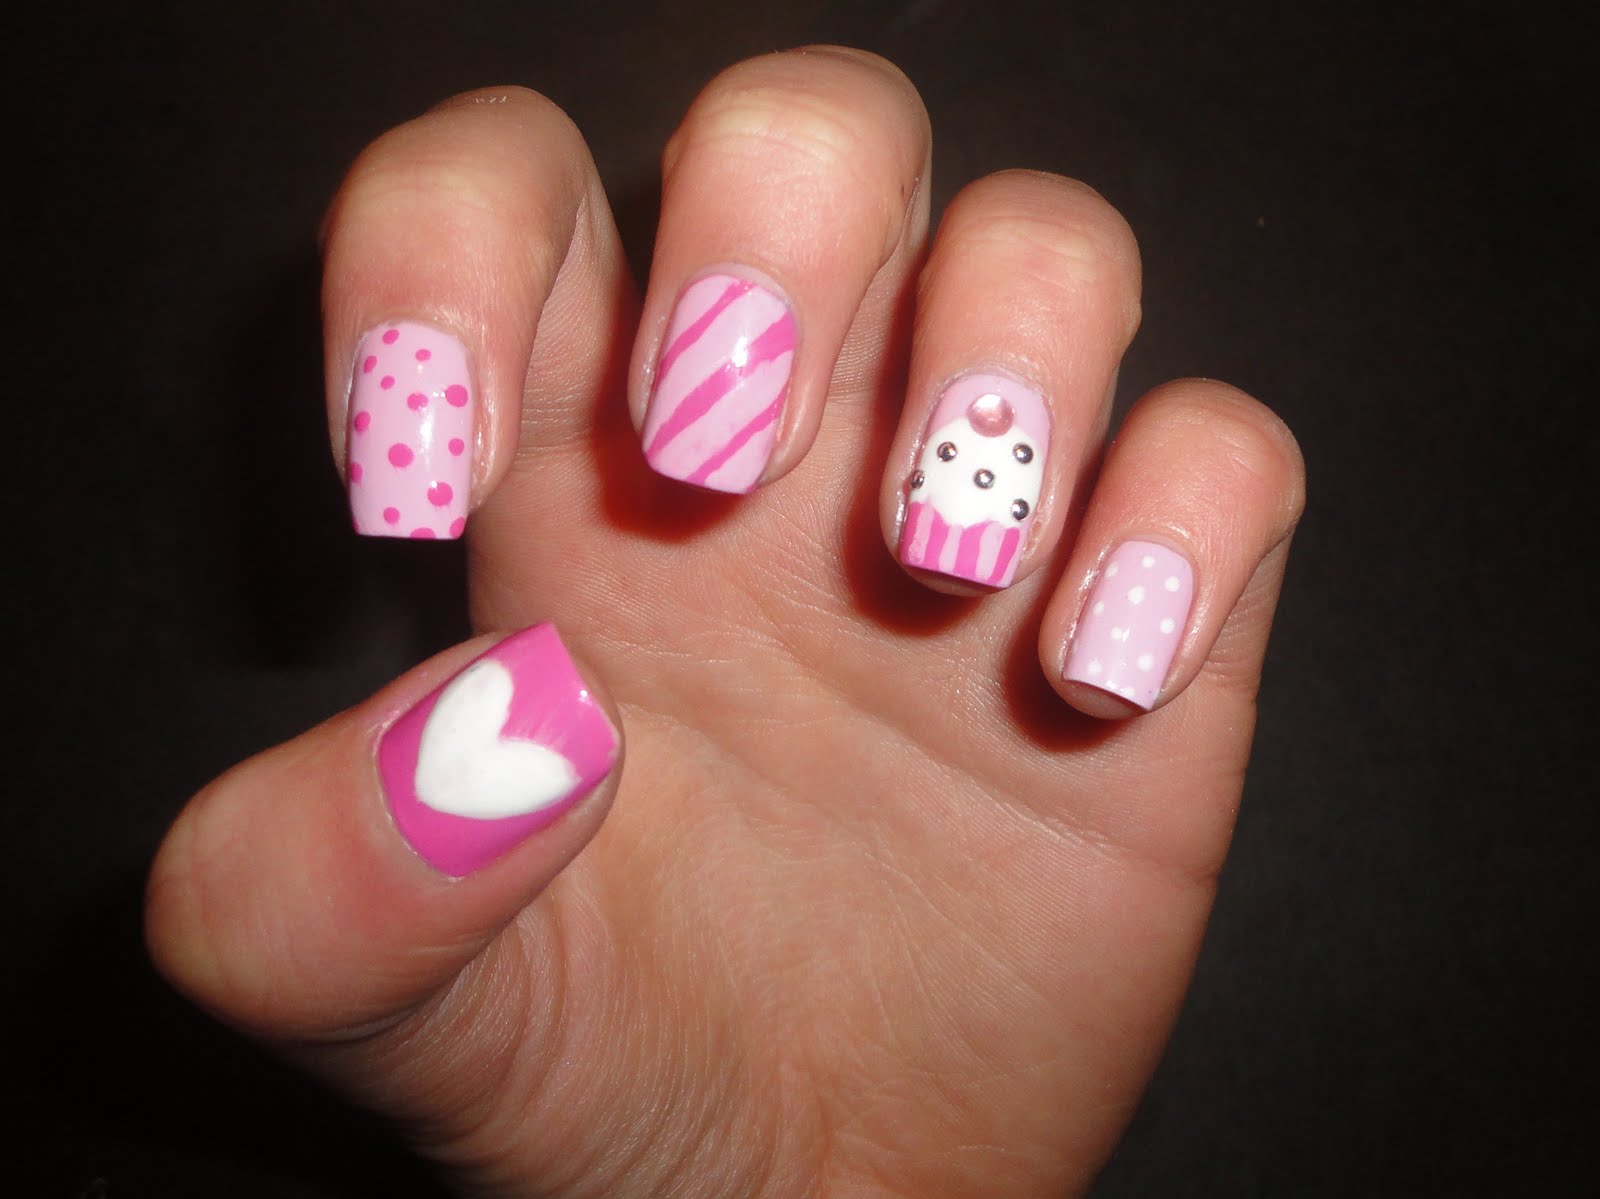 2. Simple and Cute Nail Art Ideas - wide 11